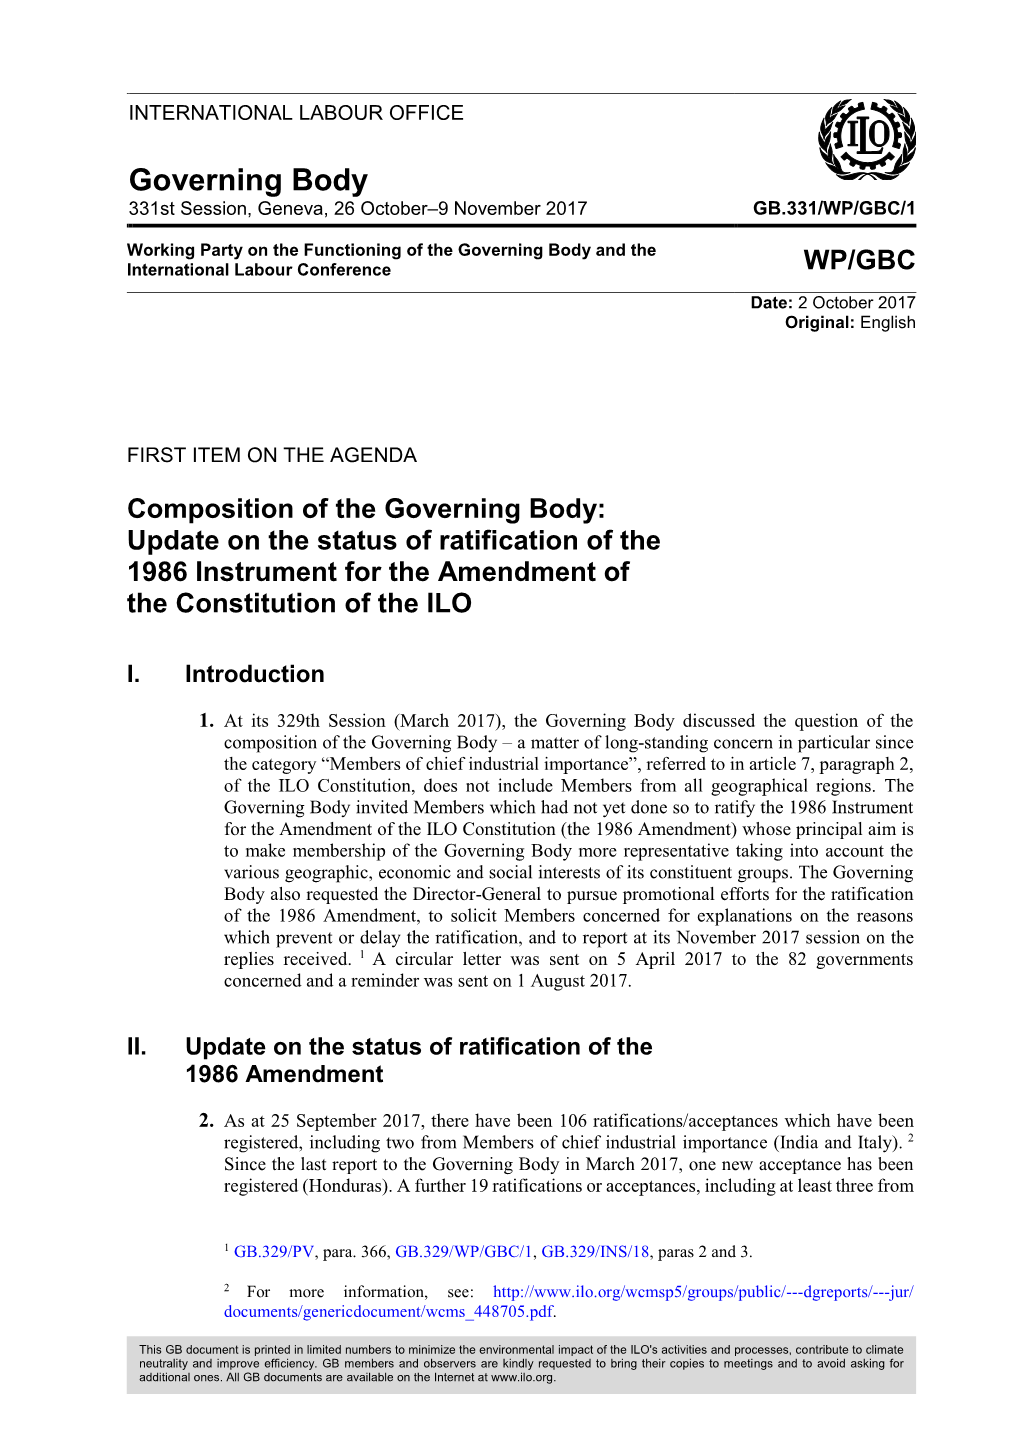 Composition of the Governing Body: Update on the Status of Ratification of the 1986 Instrument for the Amendment of the Constitution of the ILO